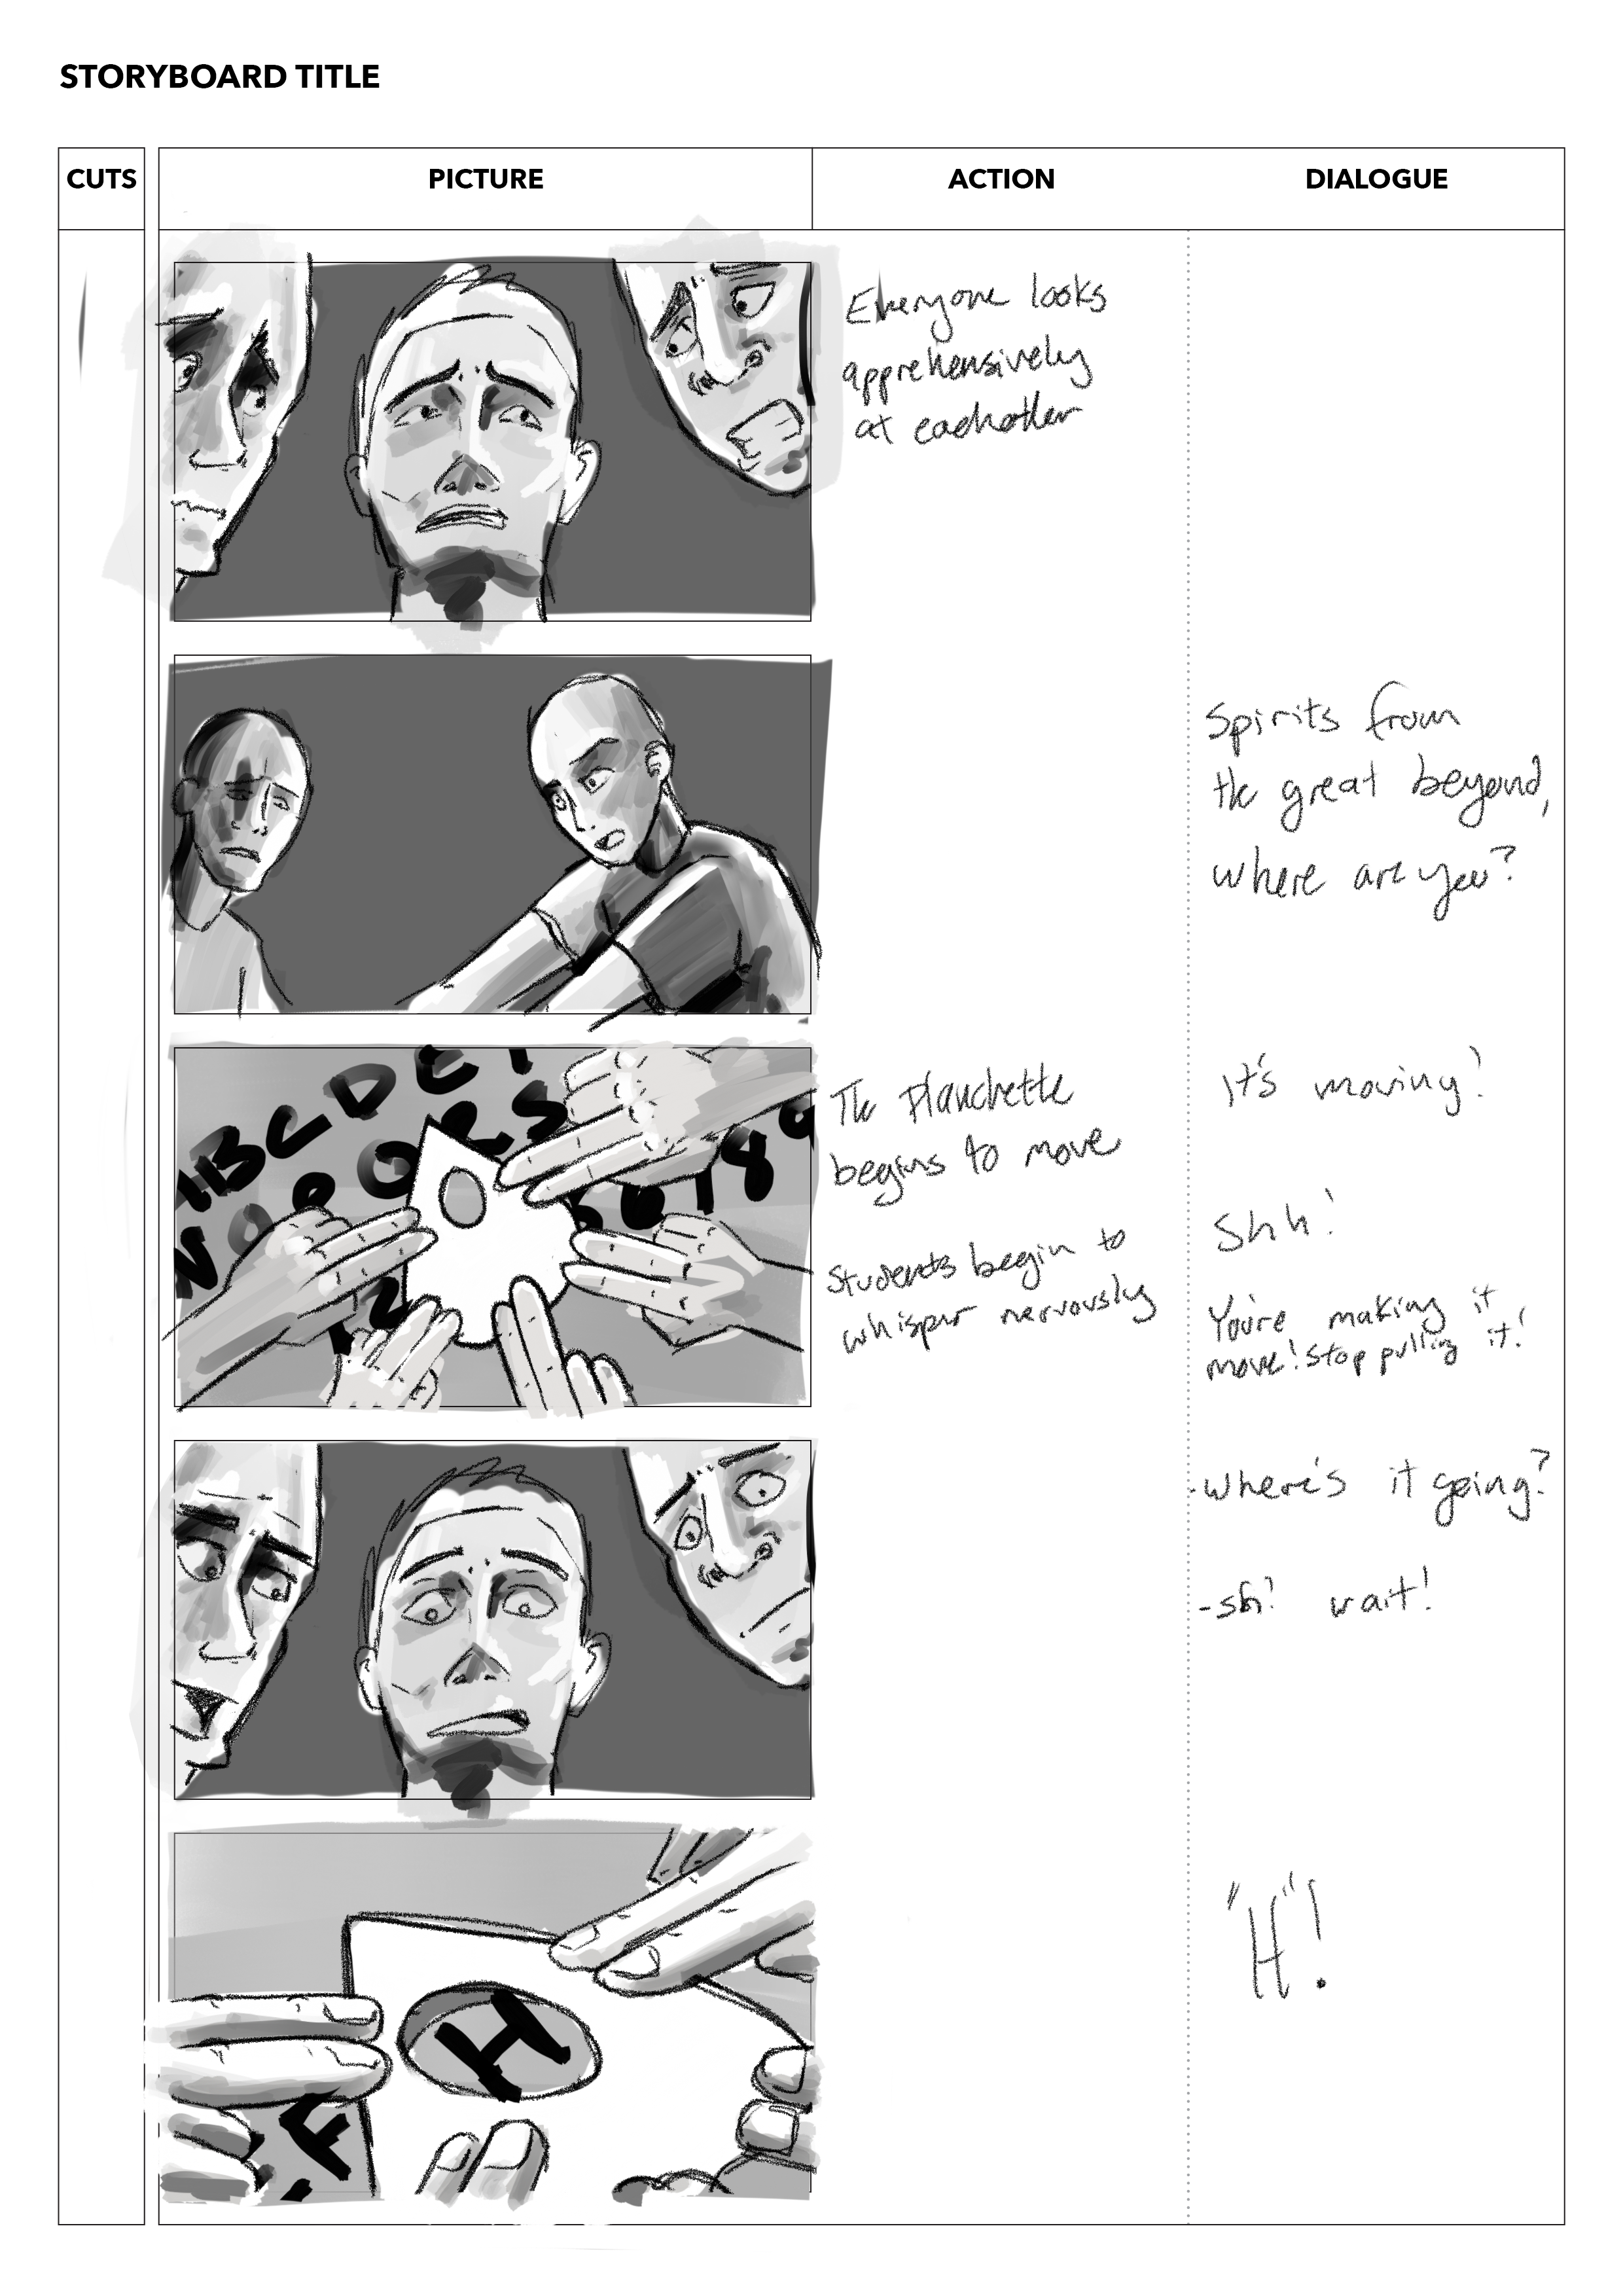 16_9_Storyboard_Template_page 3.png